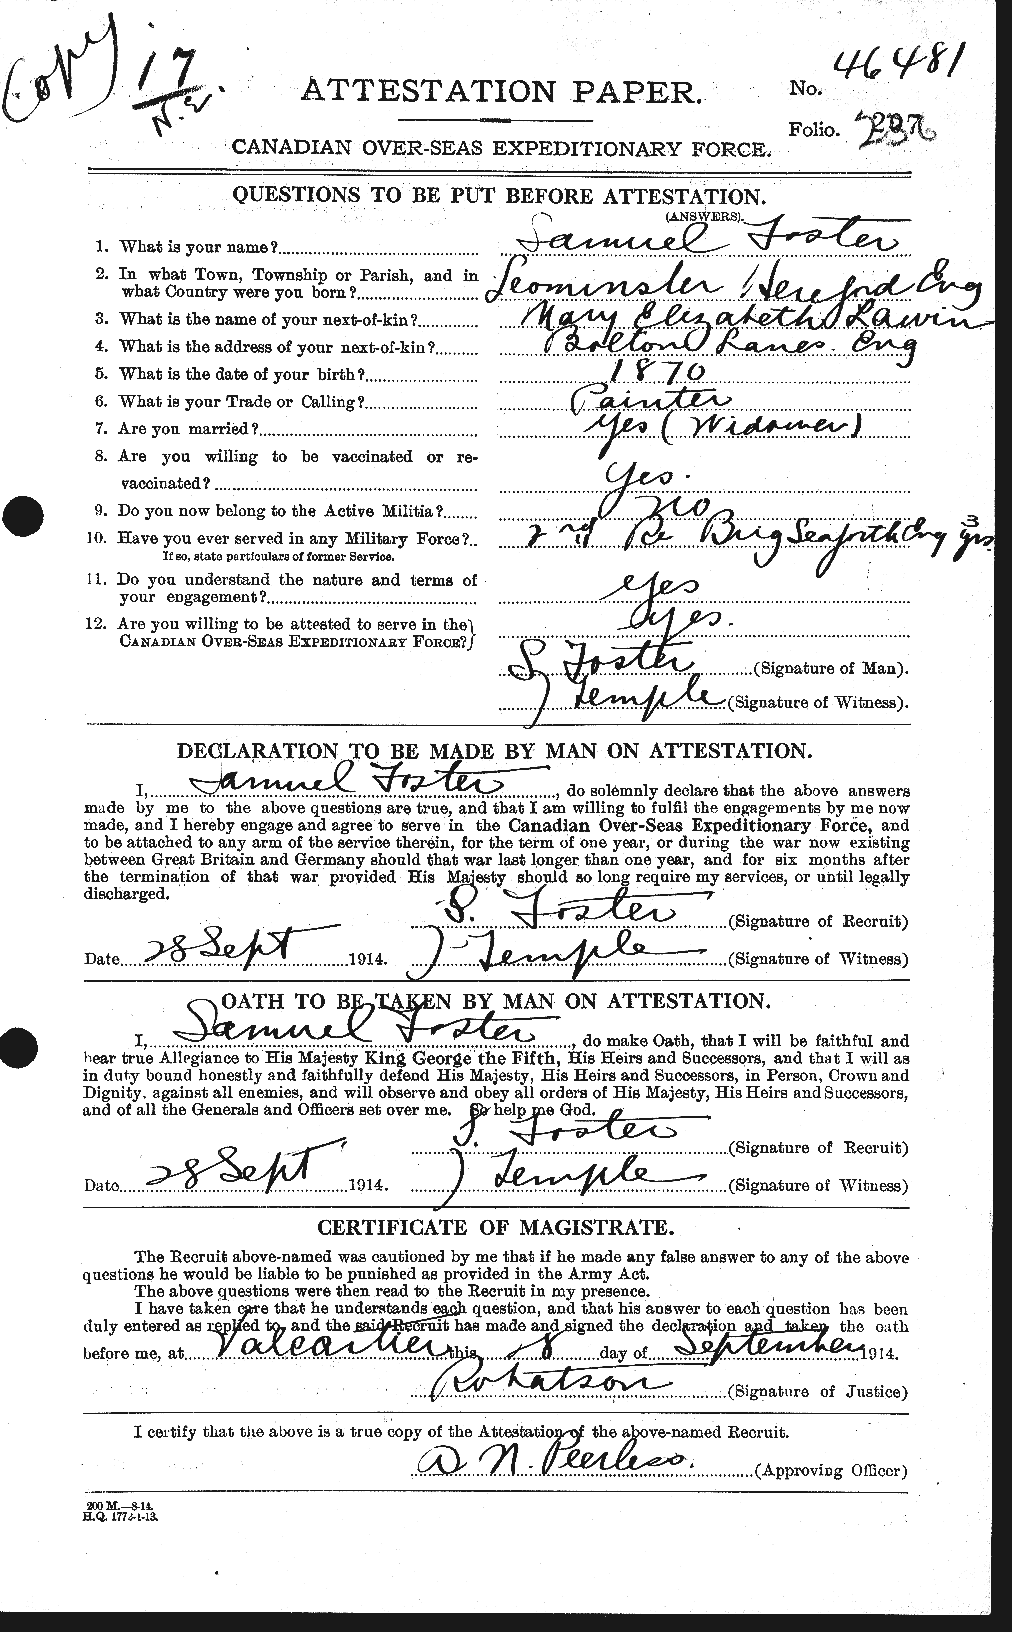 Personnel Records of the First World War - CEF 335202a